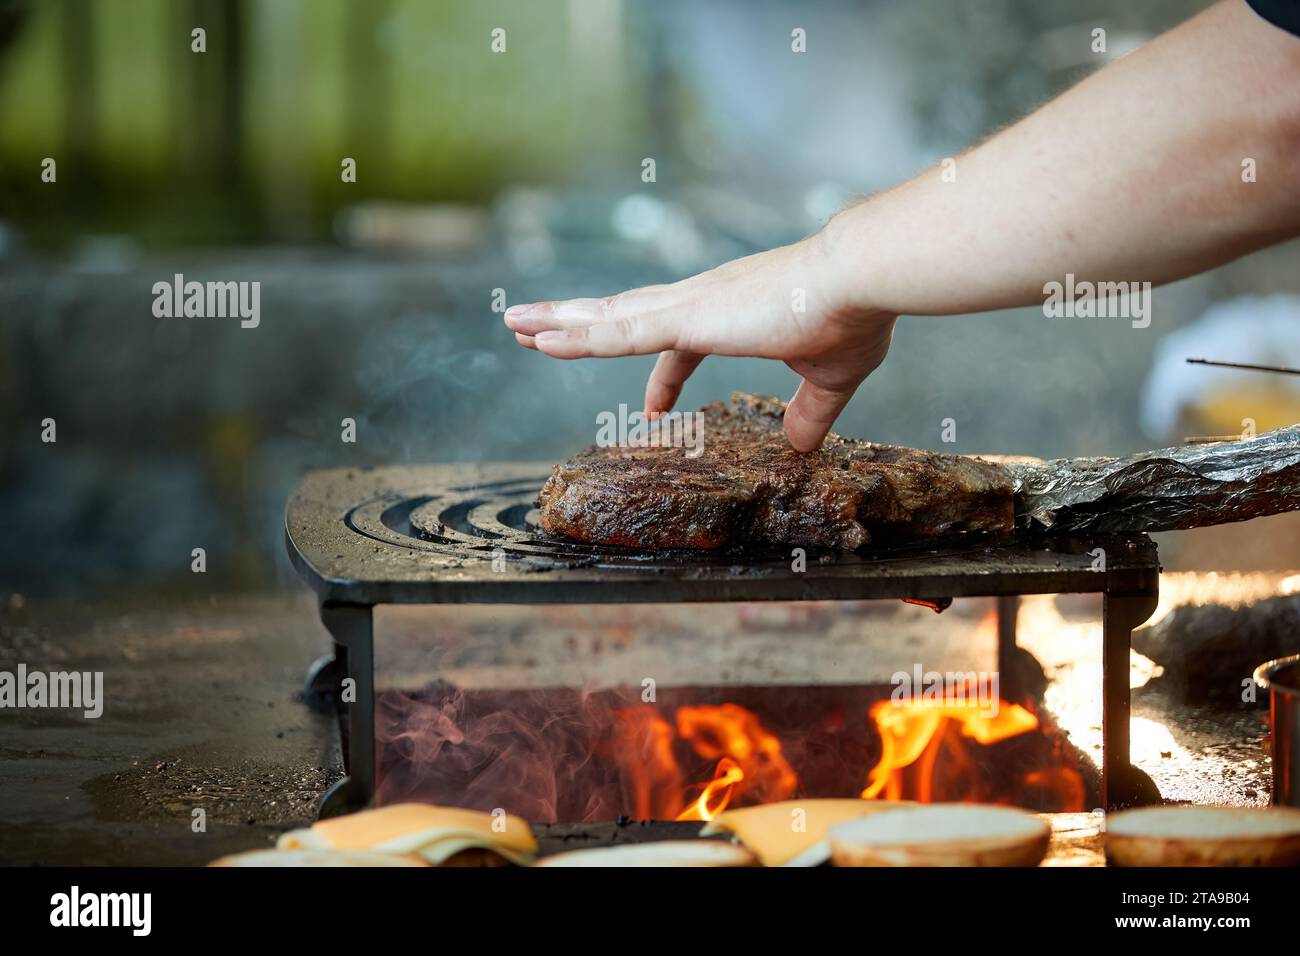 A chef controls a steak on an outdoor grill by finger. Close up of cooking at garden festival, flames, shallow depth of field, very colorful blurred b Stock Photo